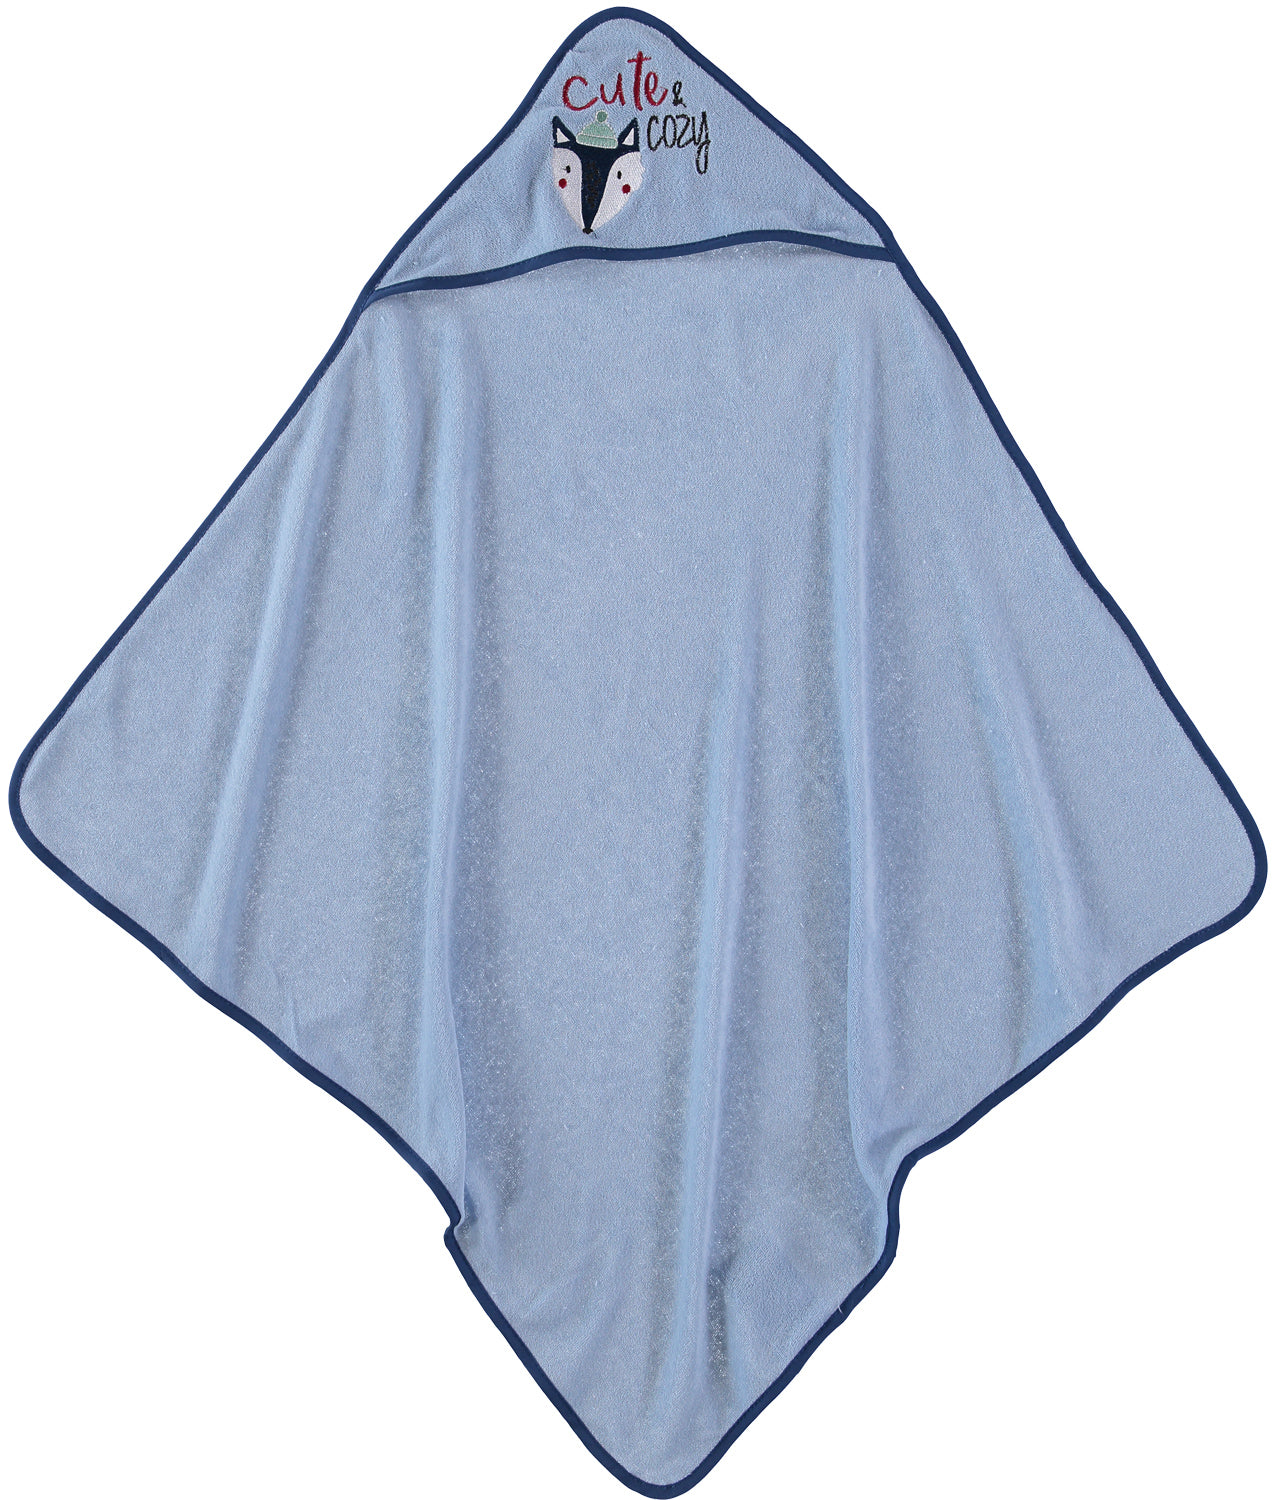 Rene Rofe Baby Bed & Bath Collection Hooded Towels, 3 Pack